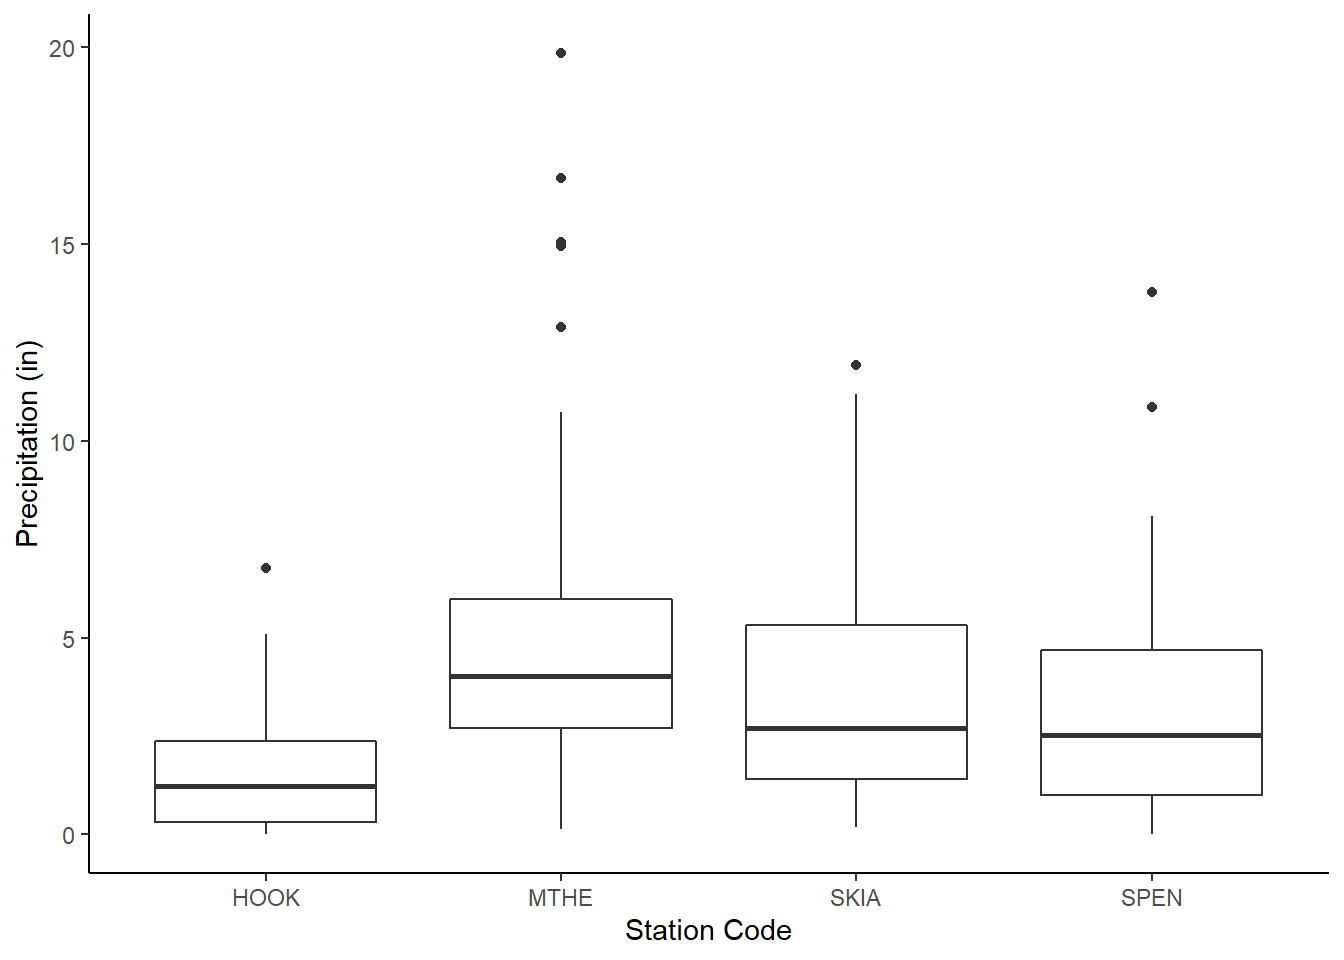 Boxplots of rainfall at four weather stations.